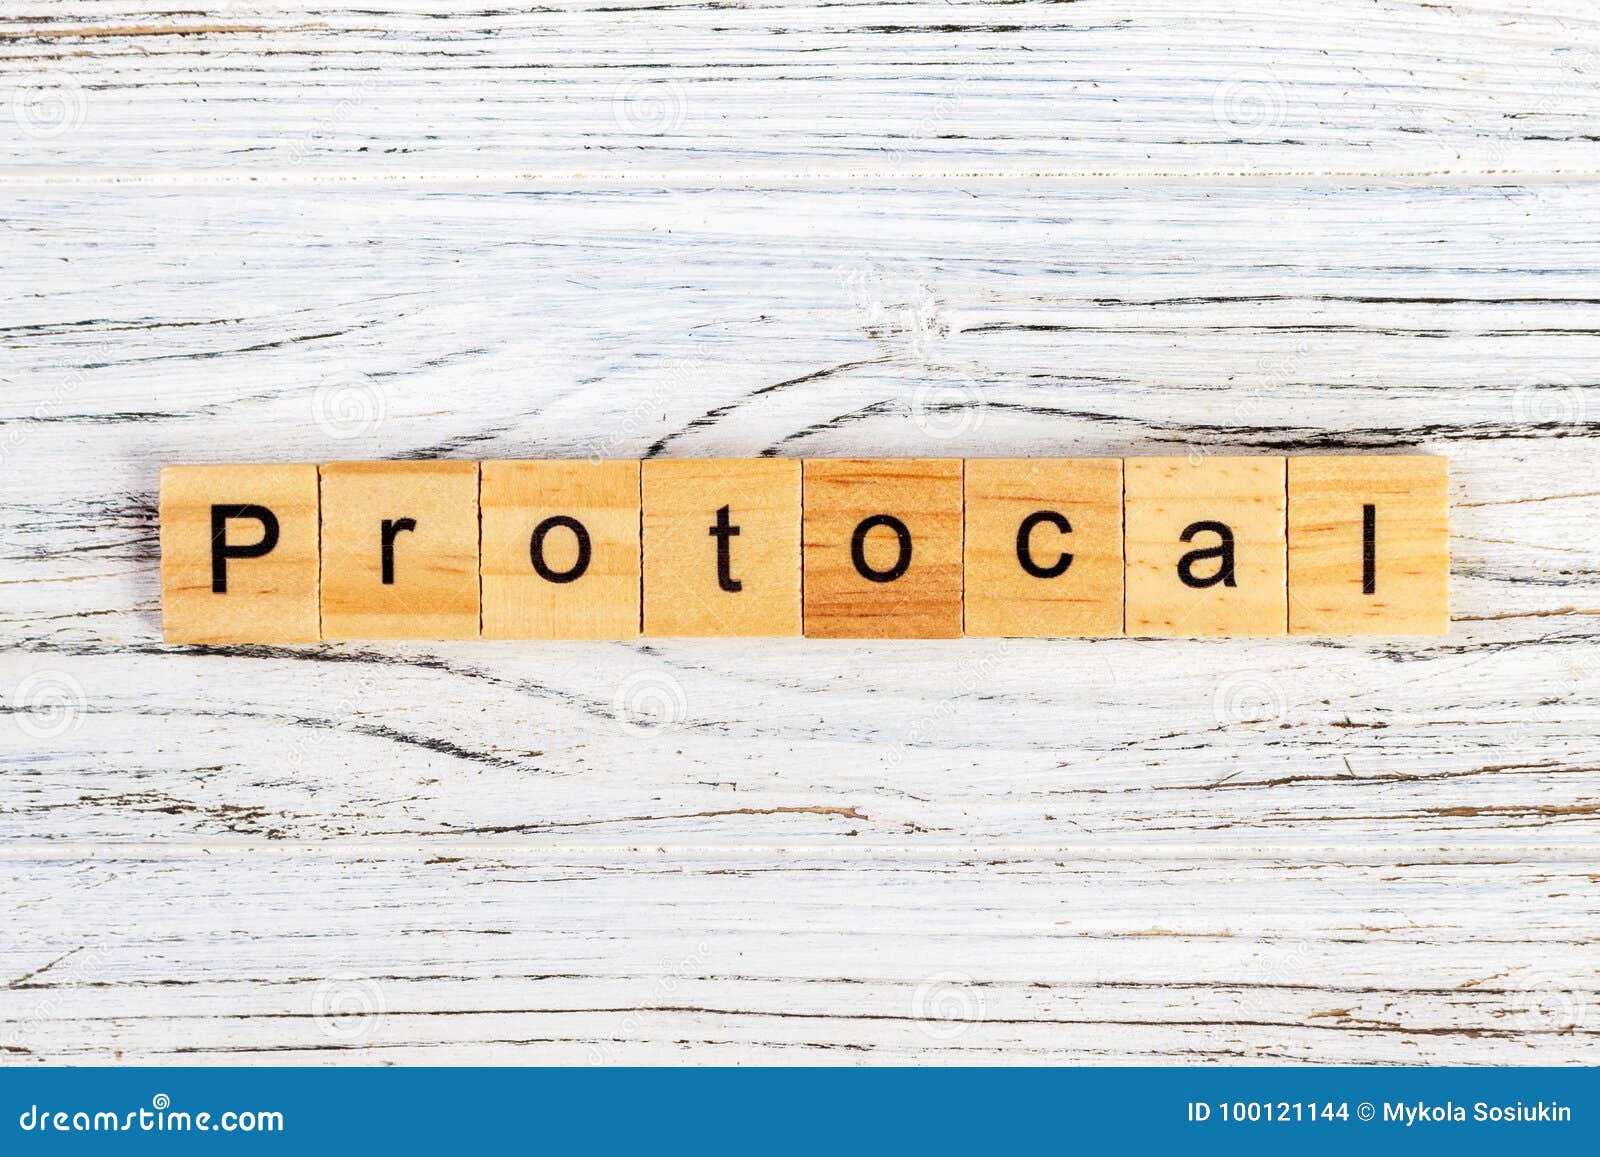 protocol word made with wooden blocks concept